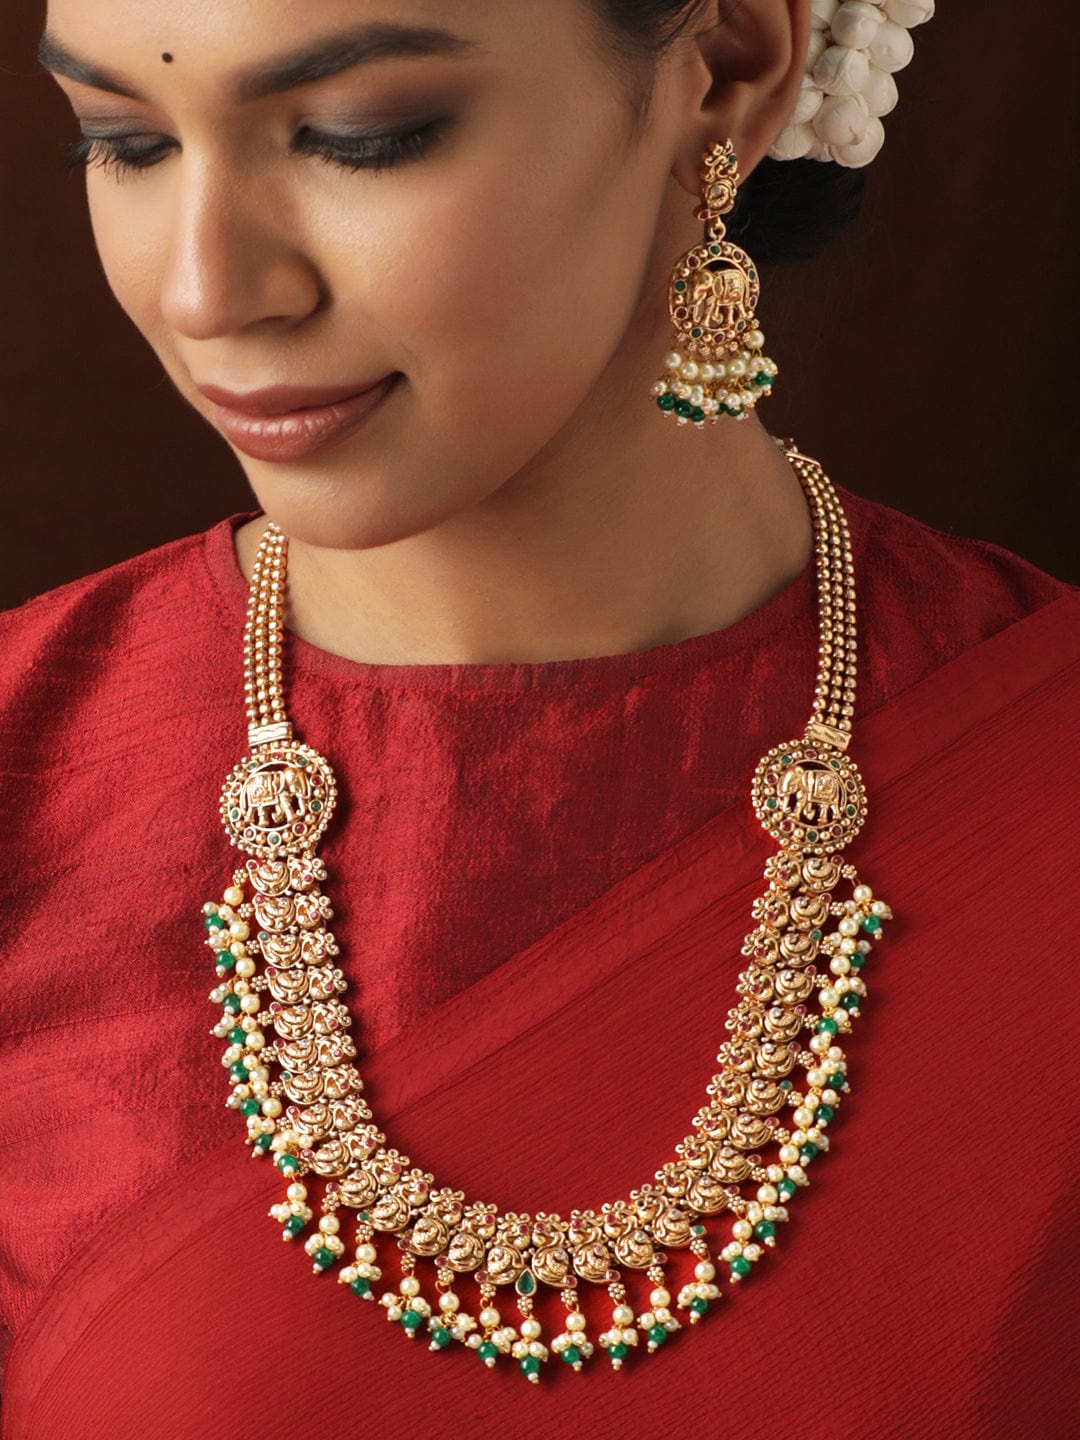 Rubans Illuminating Beauty with a Gold-Toned Temple Necklace Set Jewellery Sets